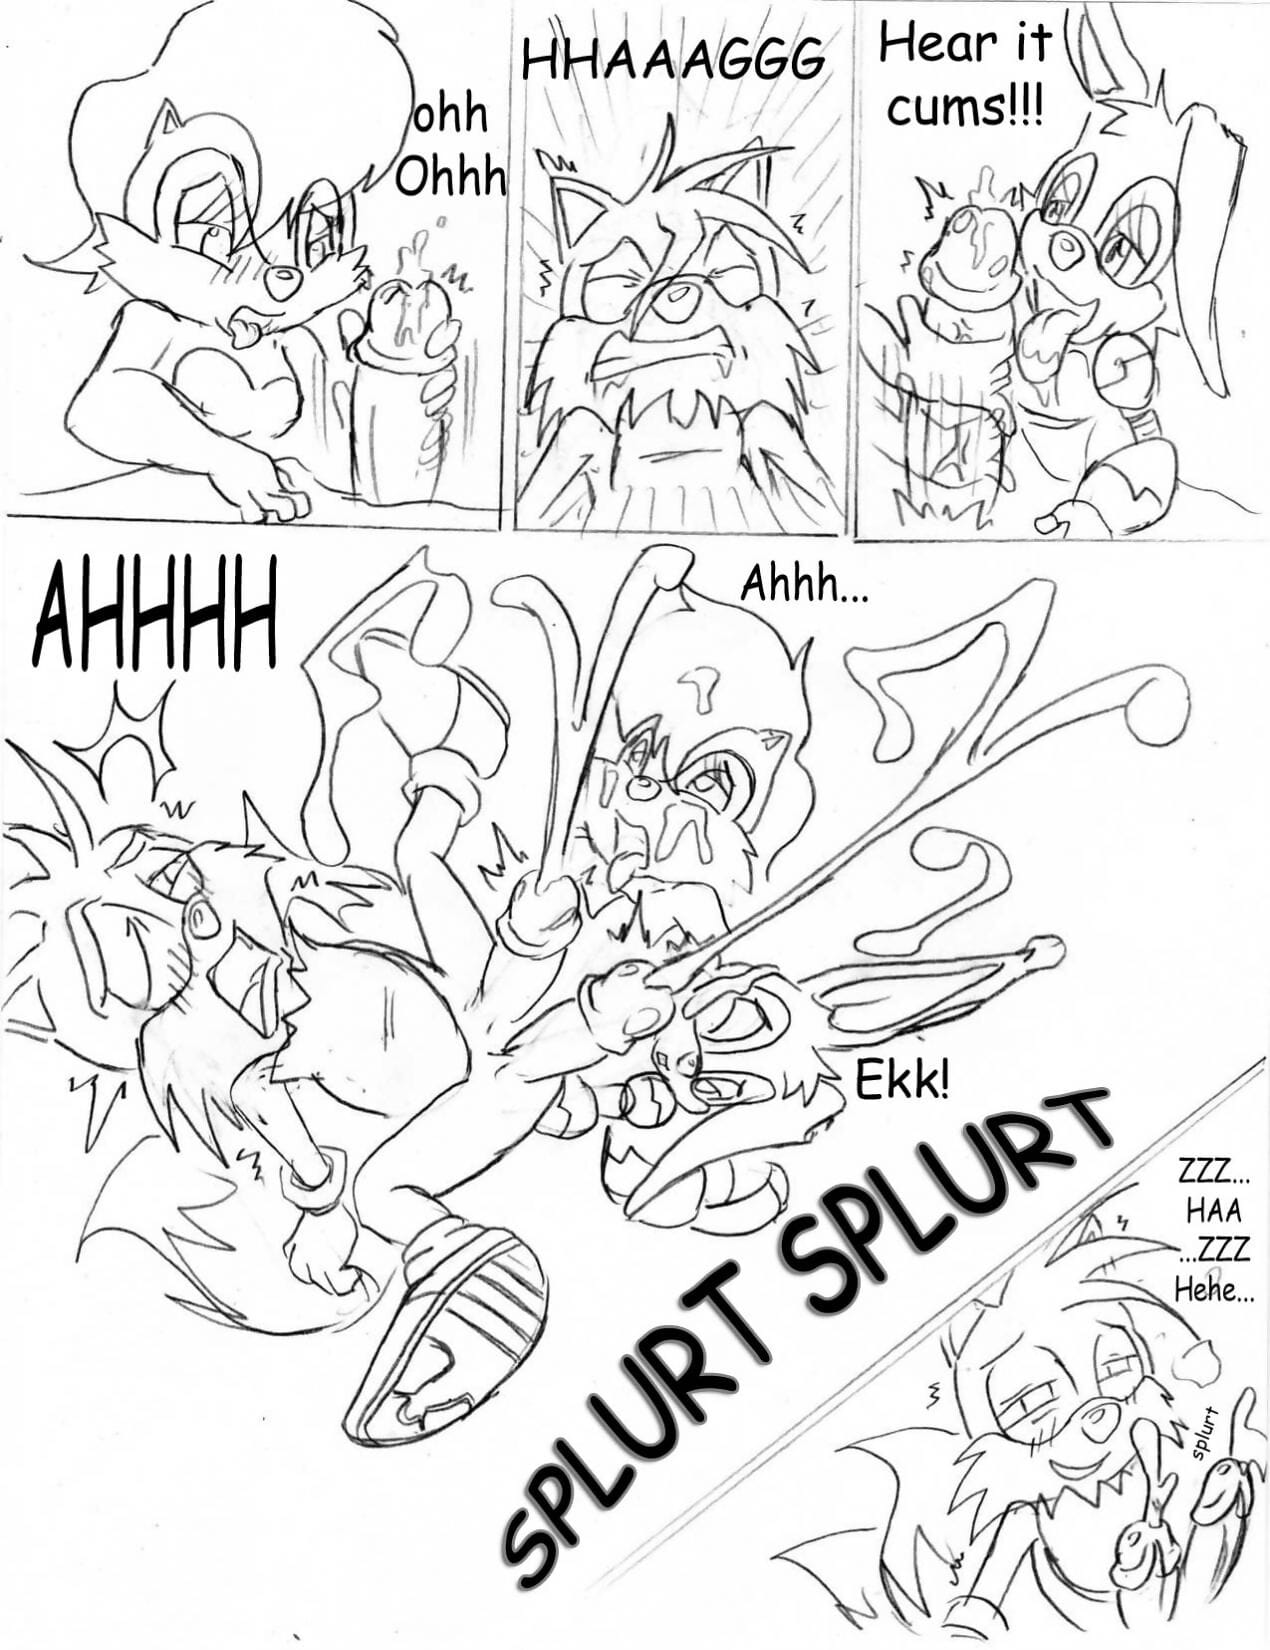 Tails Wake Up Call page 1